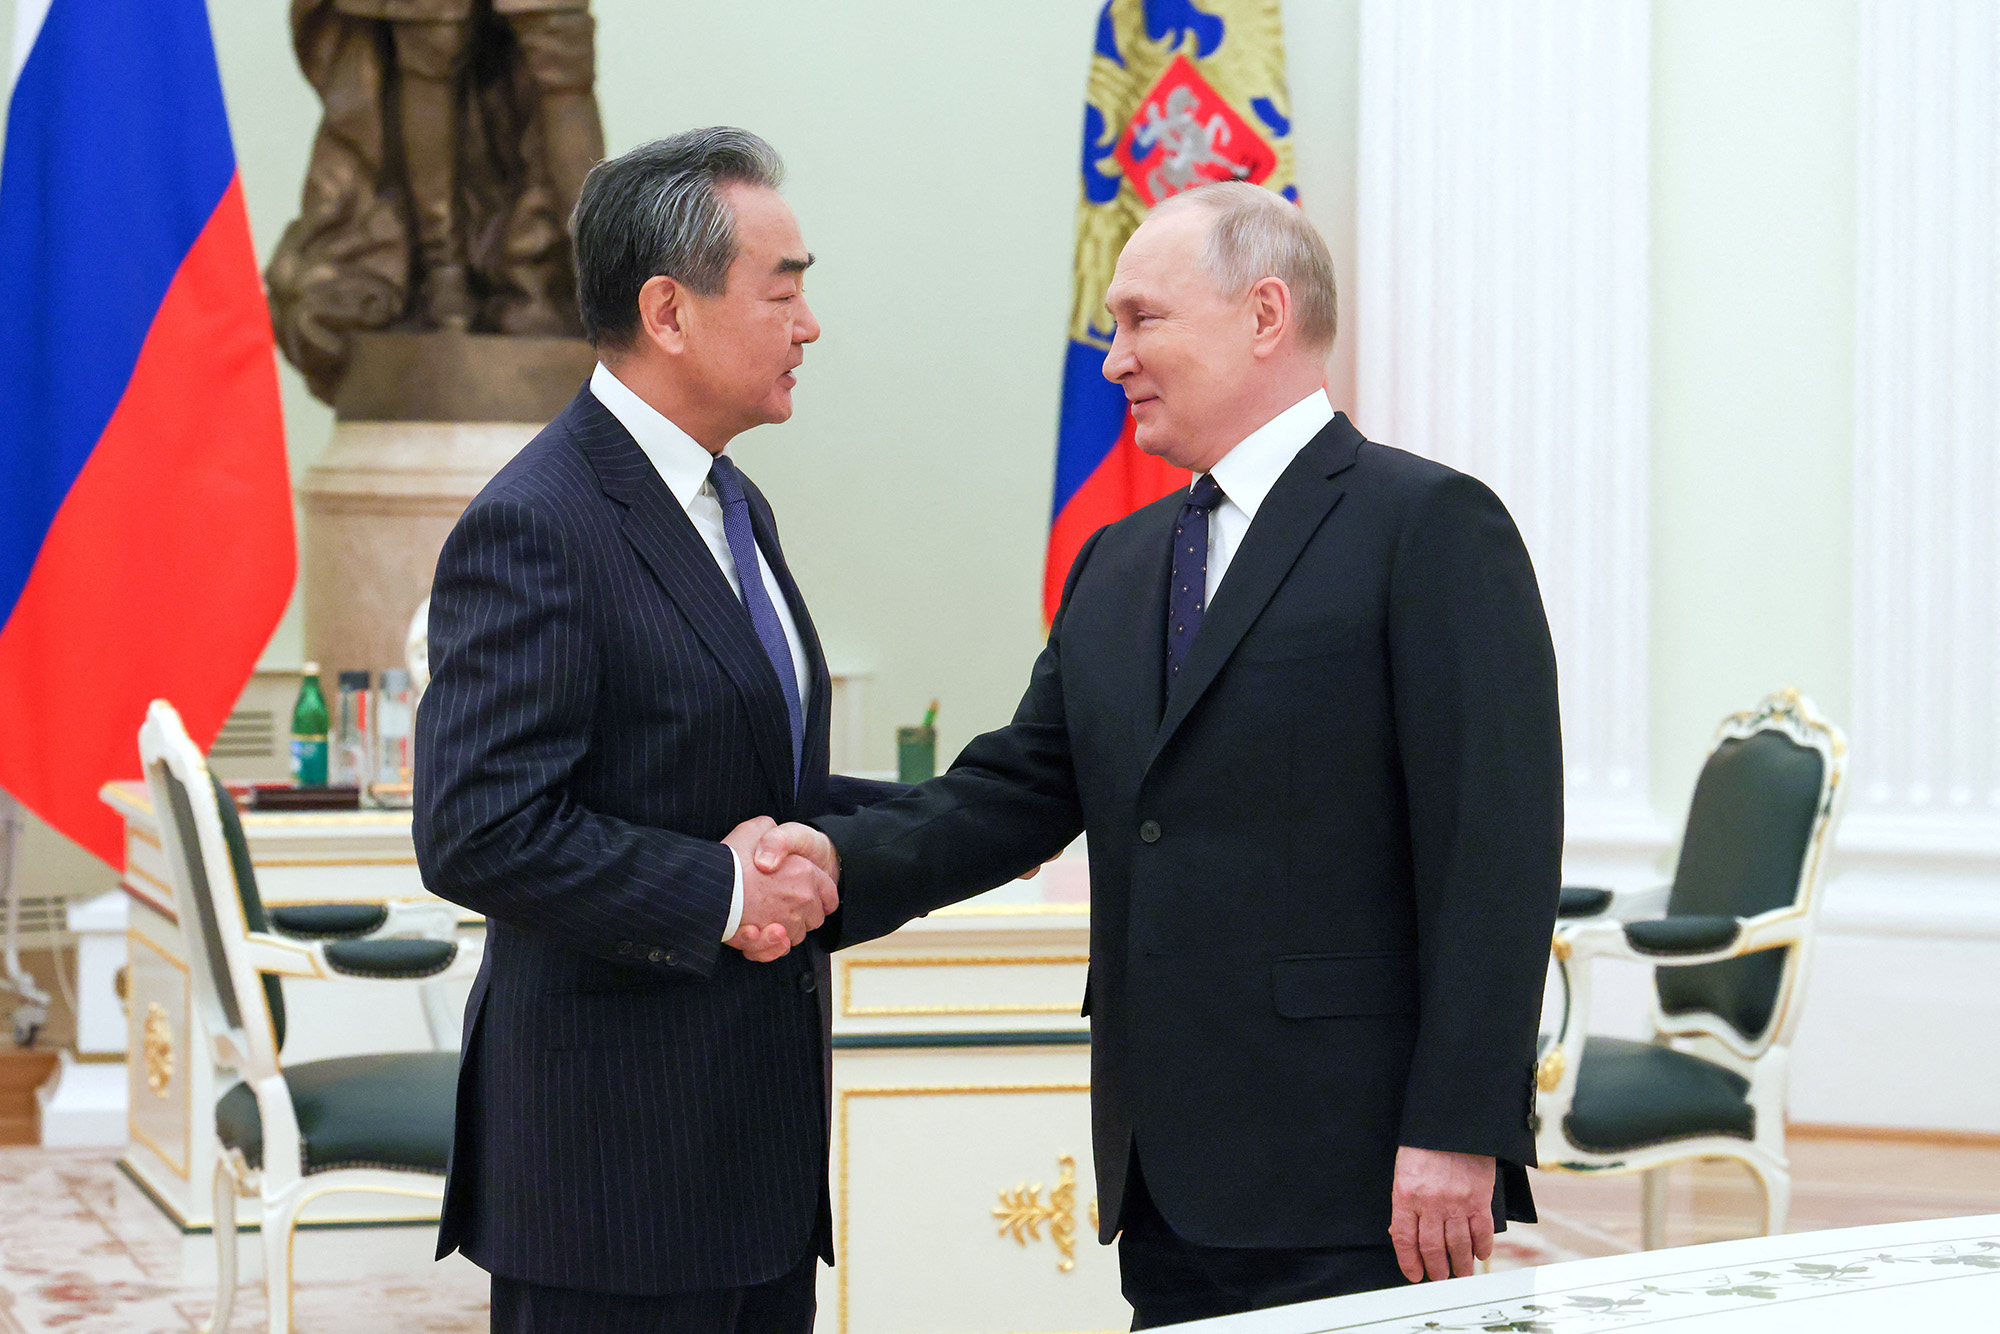 Russia's President Vladimir Putin, right, shakes hands with China's Director of the Office of the Central Foreign Affairs Commission Wang Yi during a meeting in Moscow, Russia, on February 22.